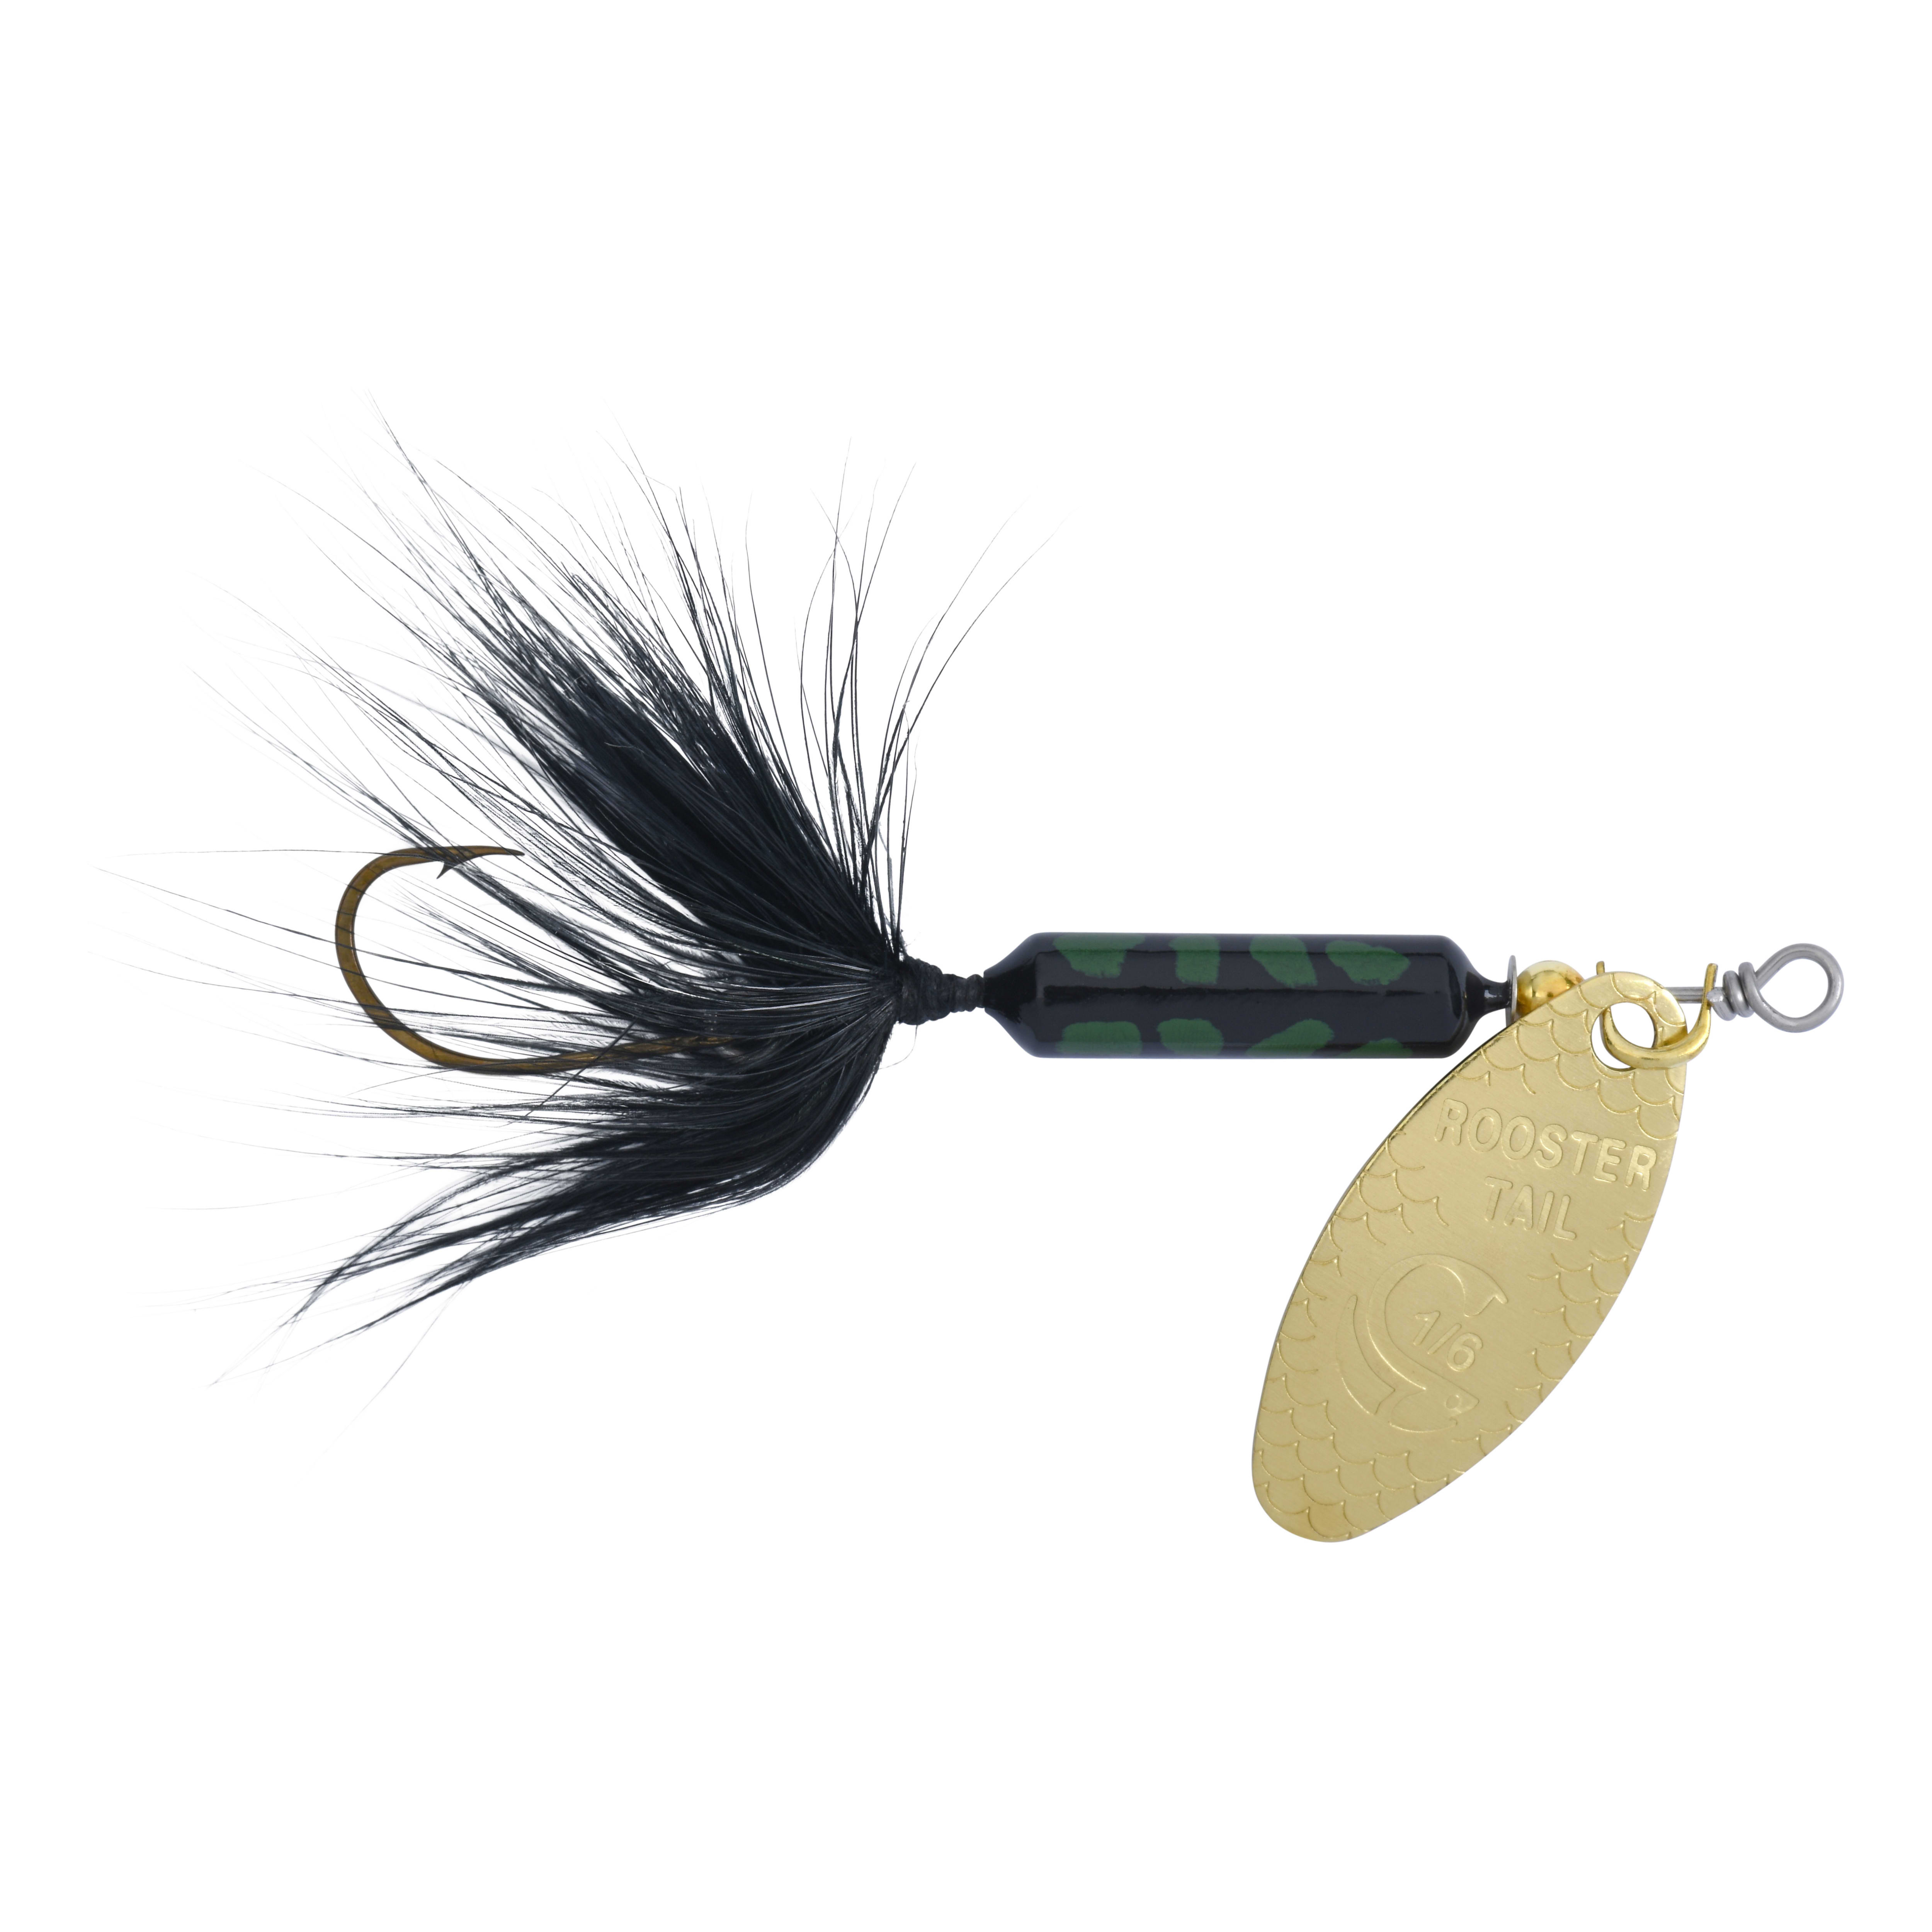 Fishing bait, fishing lures, spoons, tackle - you decide what to call them!  Manufactured by Dick Nite Spoons. Also Fishermun's Lure Coat fishing tackle  paints